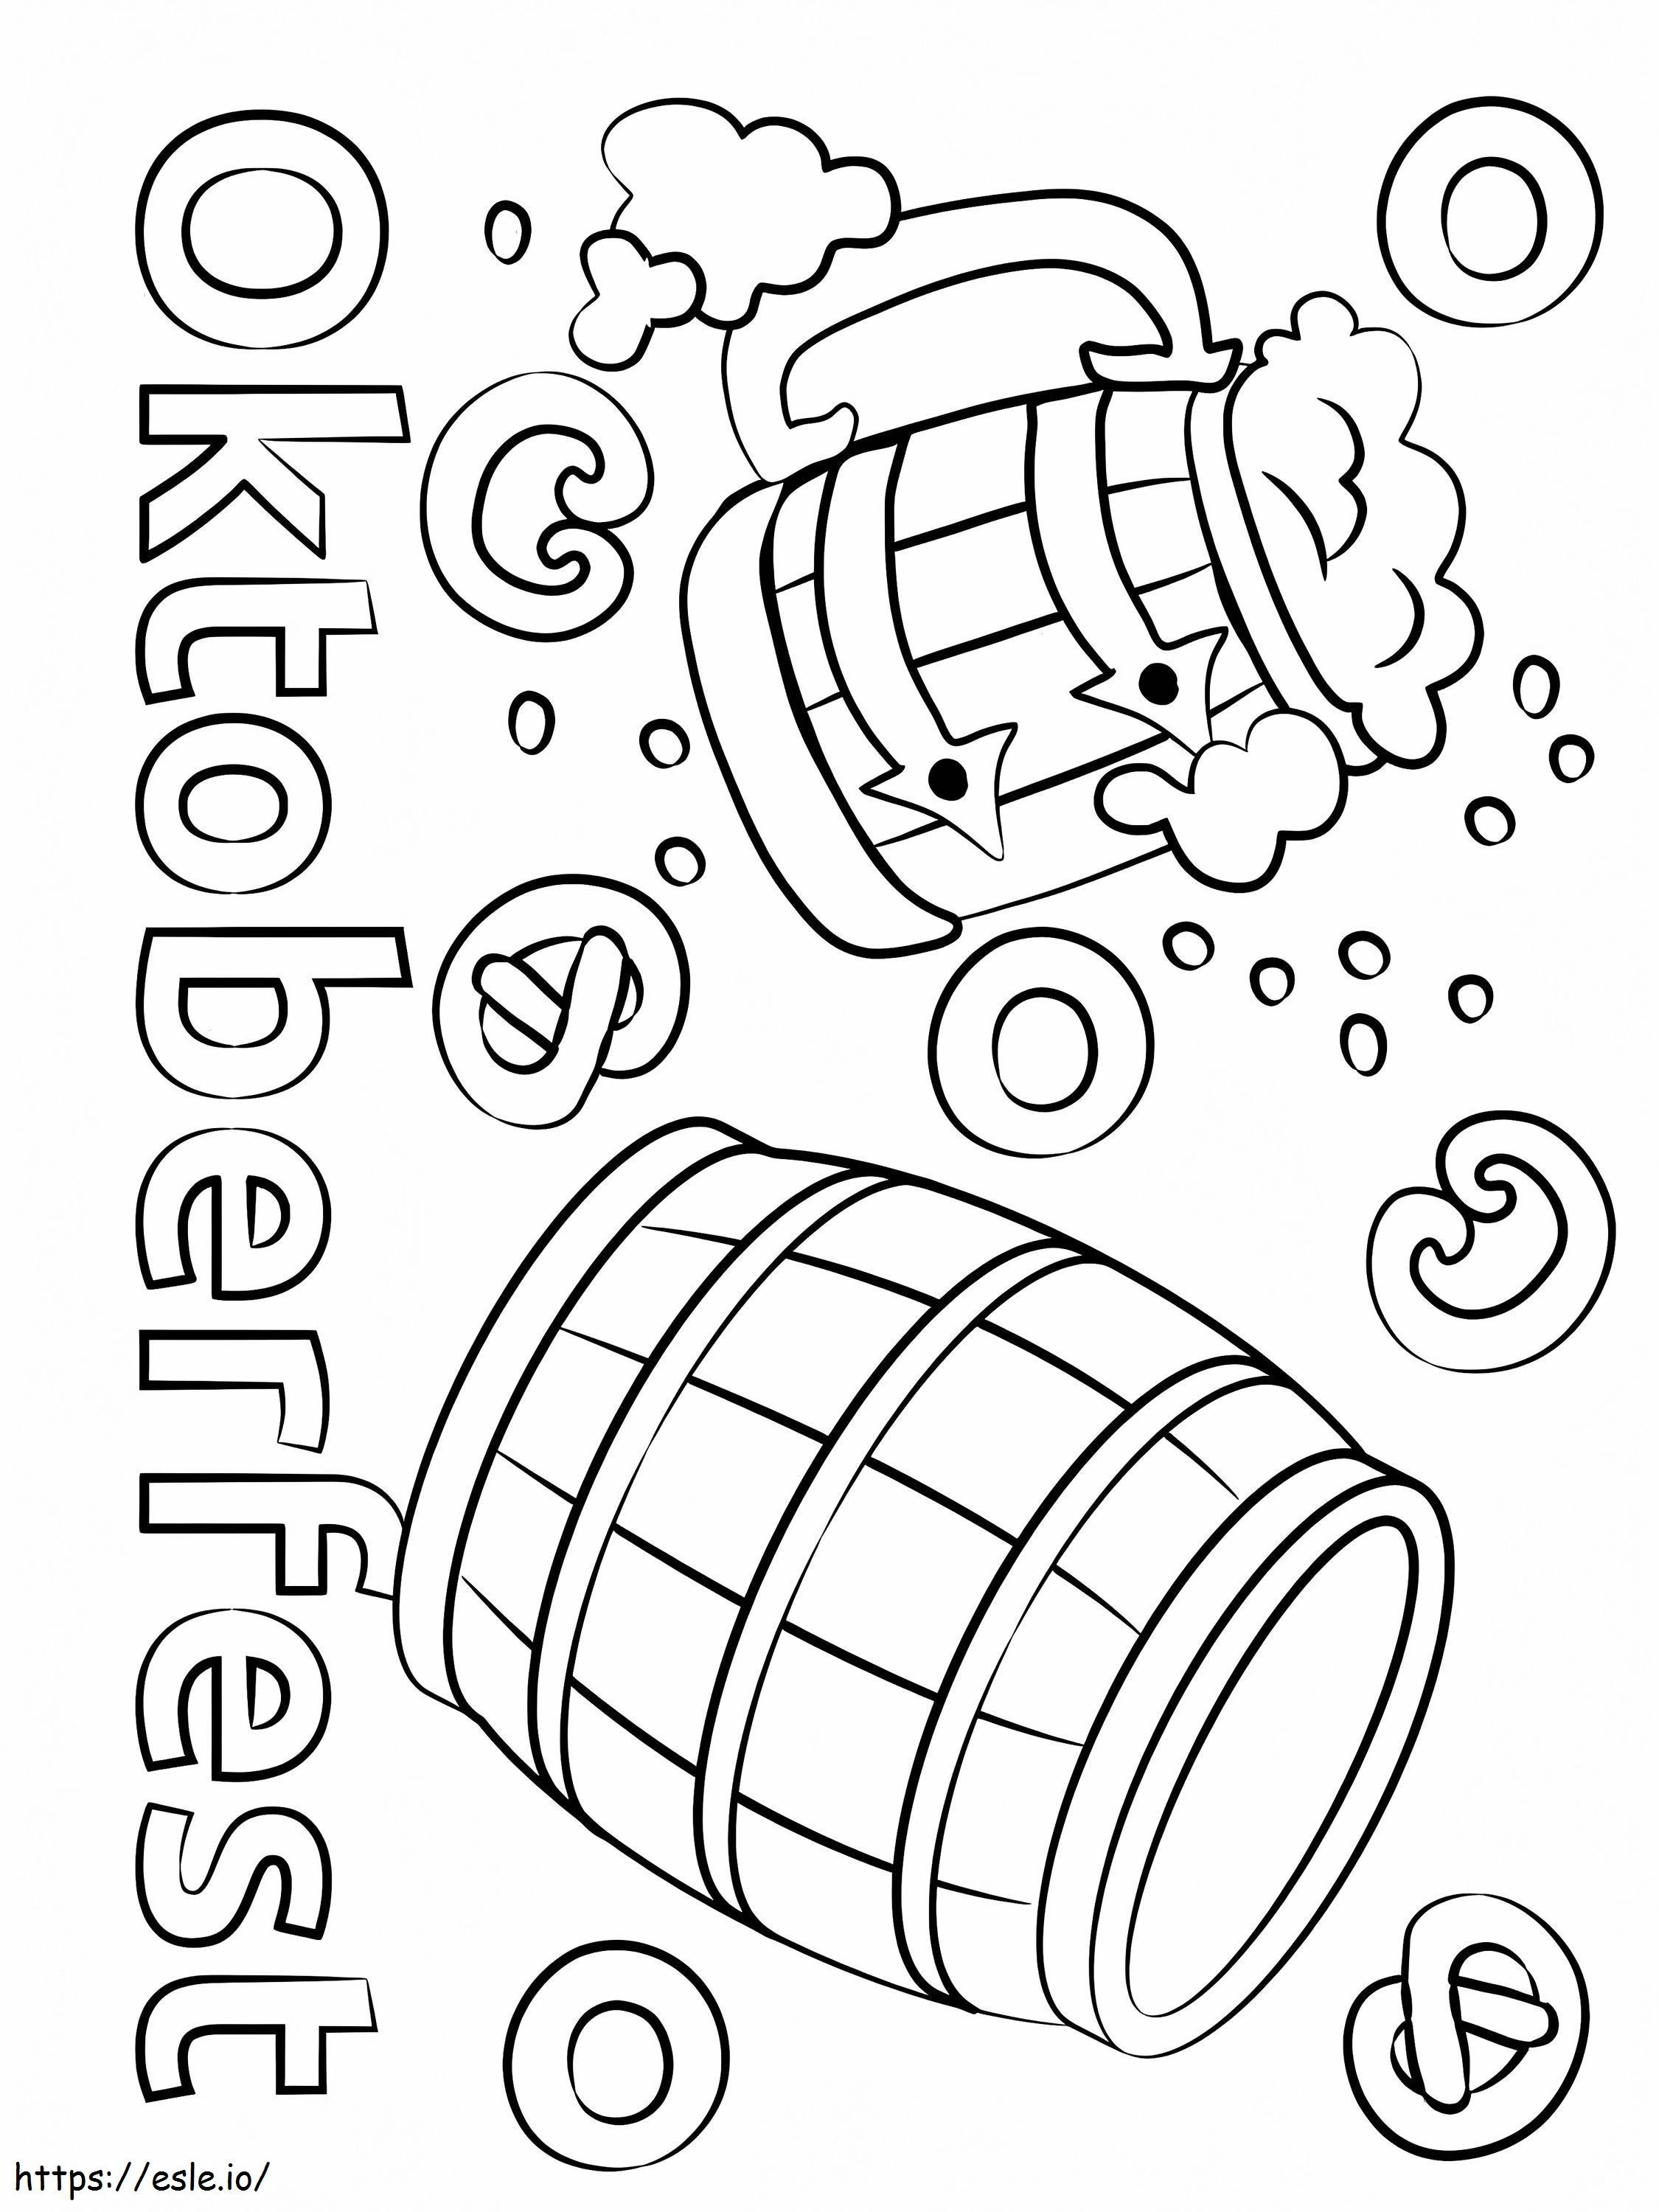 Oktoberfest 7 coloring page